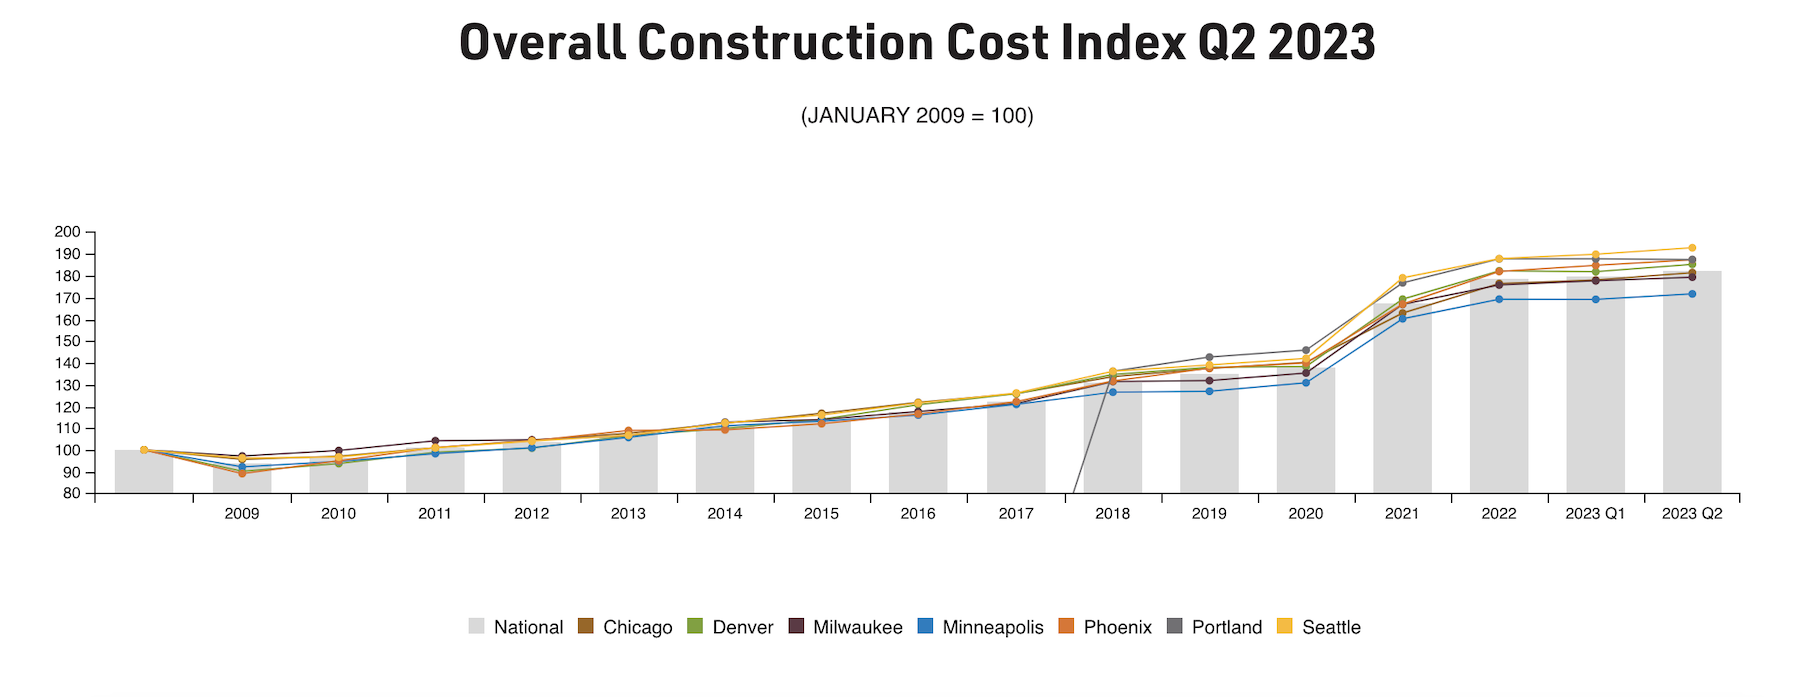 Mortenson's Construction Cost Index shows a leveling off of prices